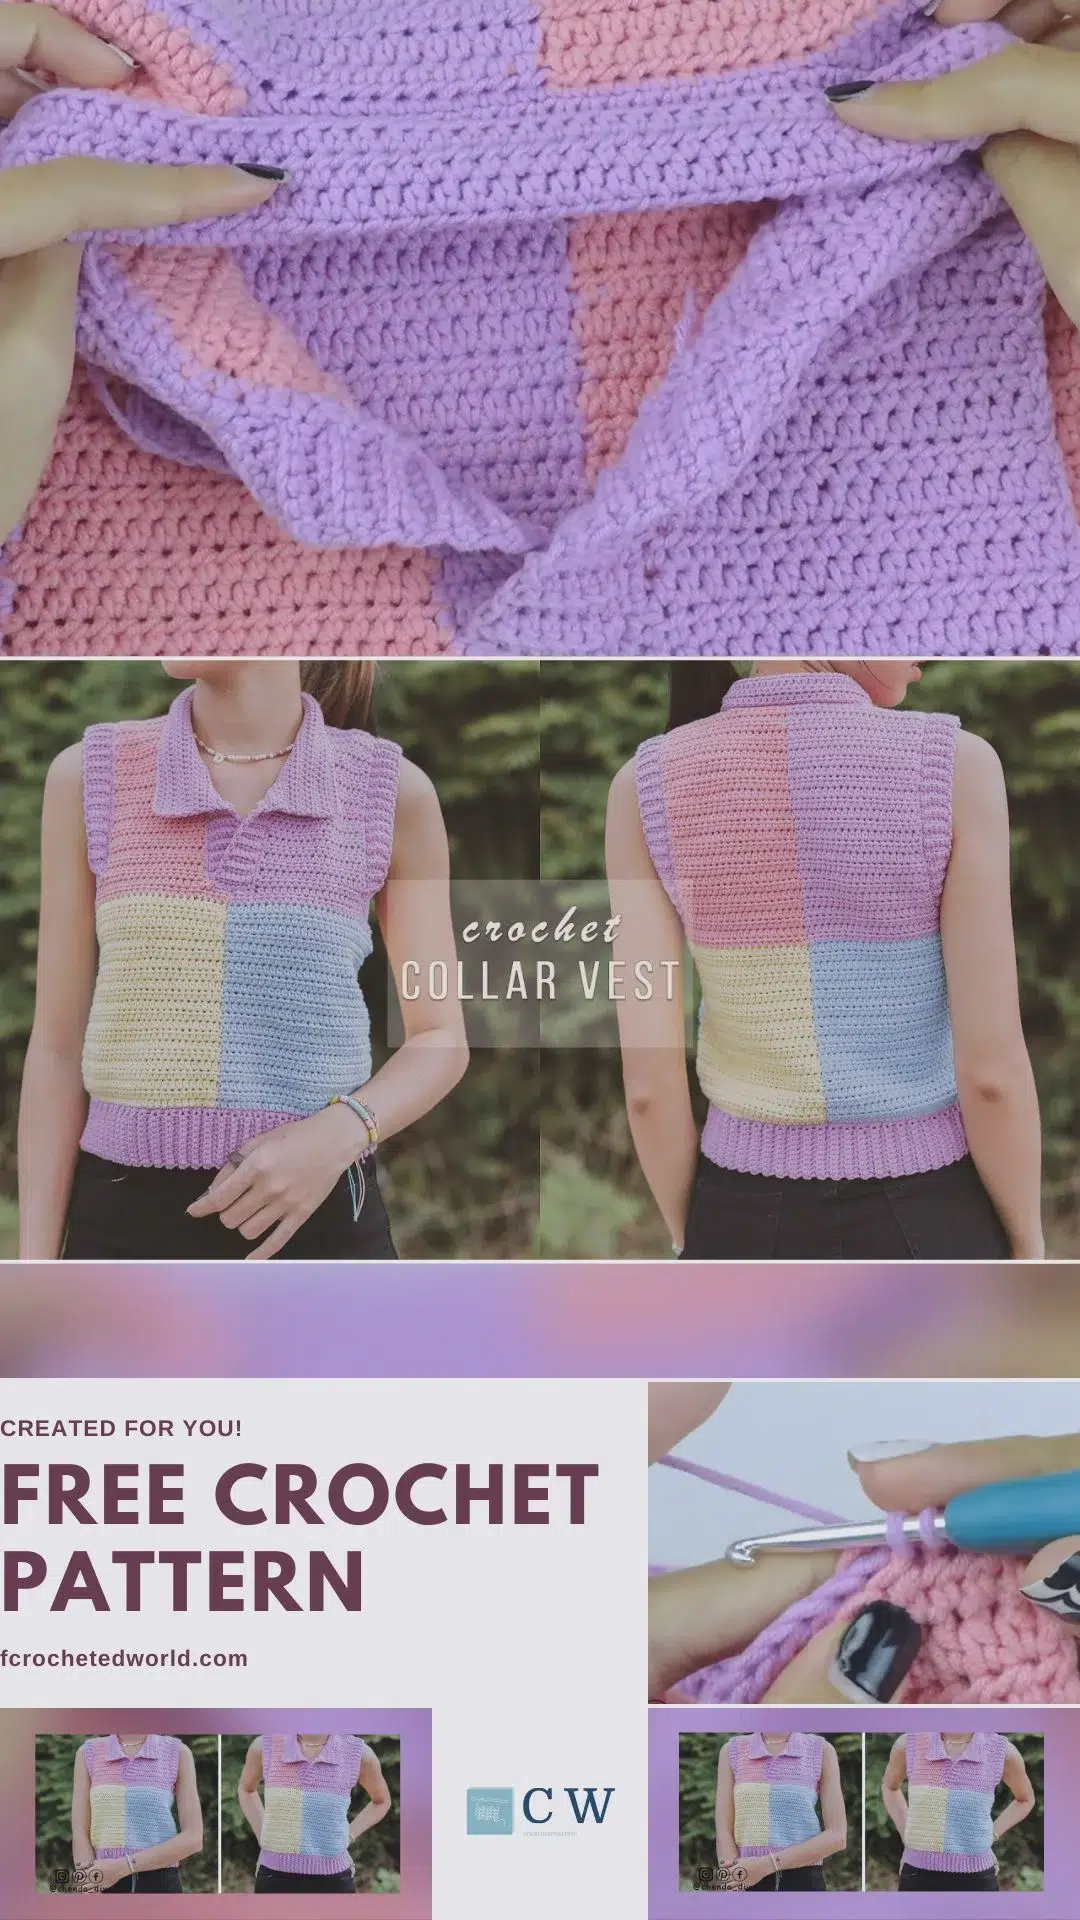 Easy Crochet Vest Free Pattern  is step by step guided tutorial for beginners. The crochet vest is one of the most beautiful creations I have ever seen. 